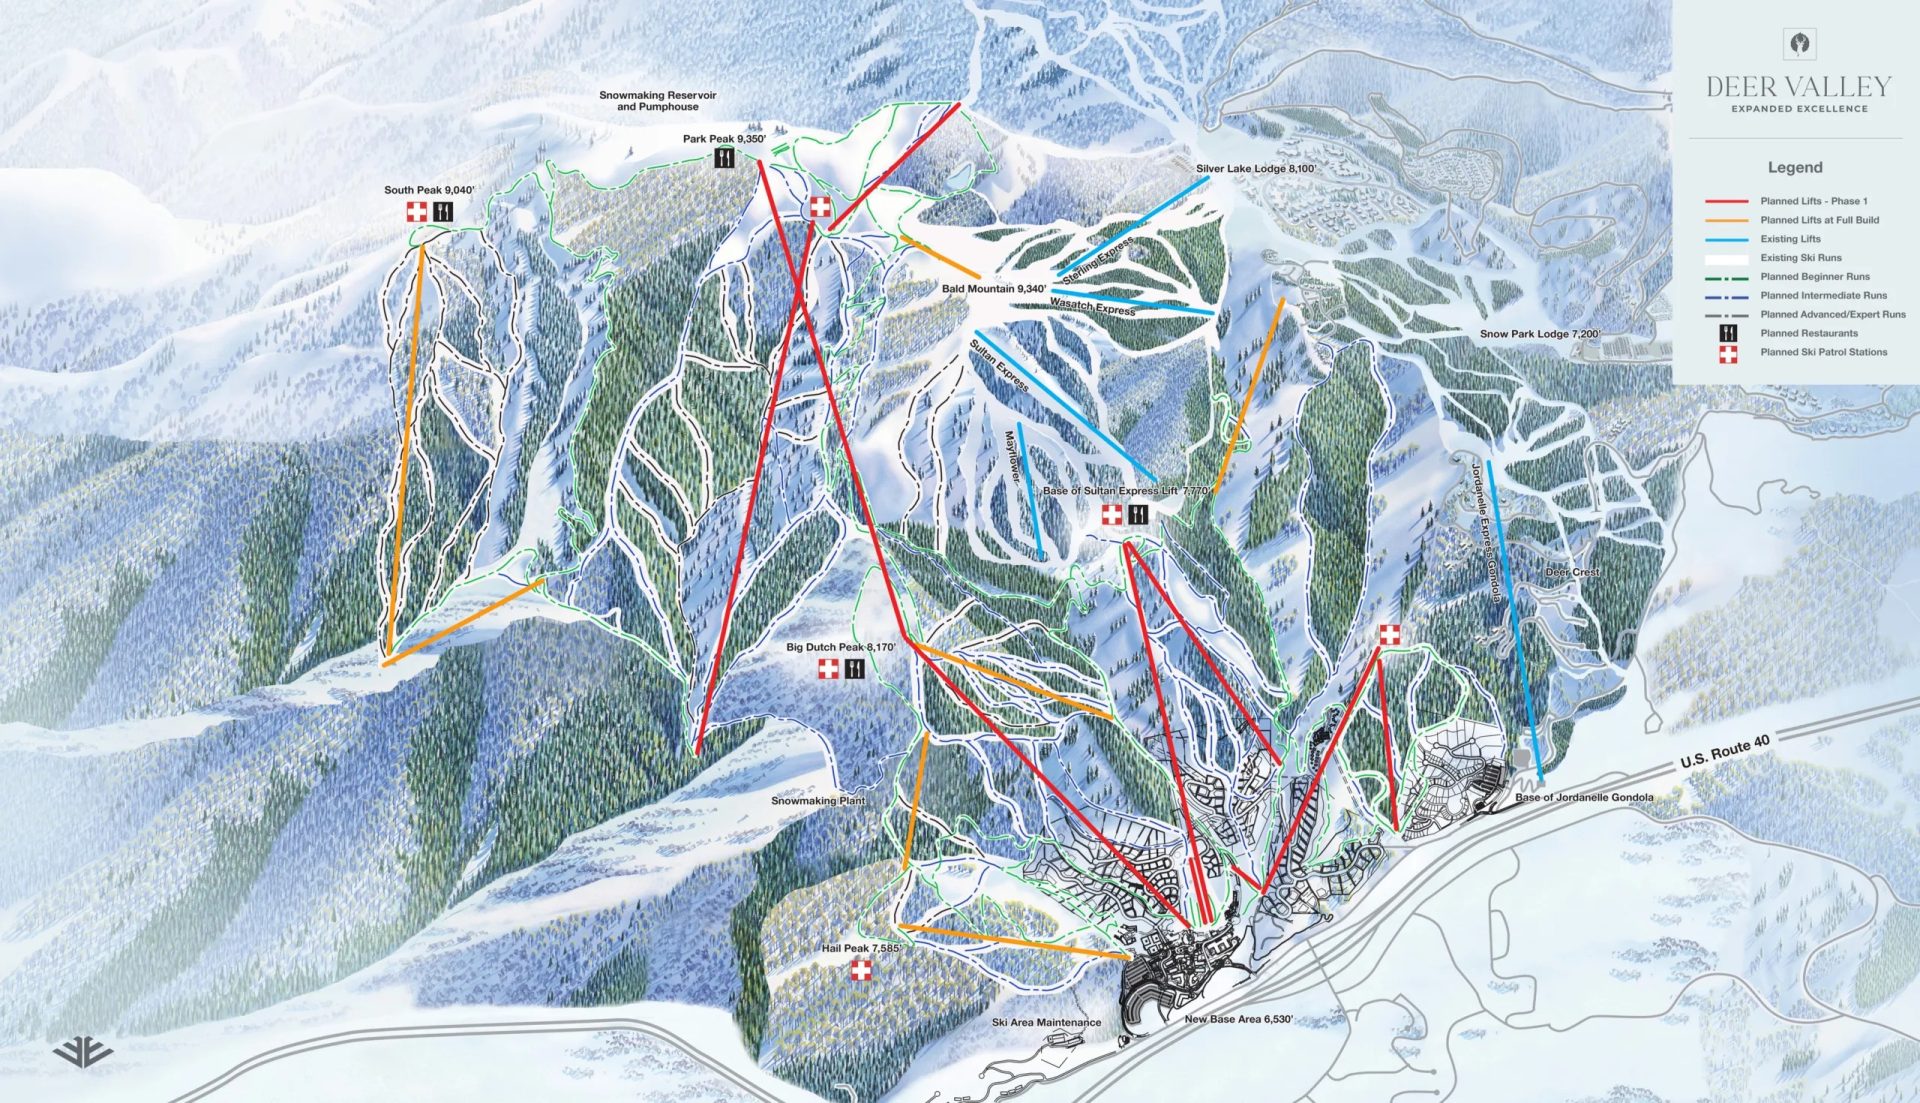 expanded trail map for new deer valley